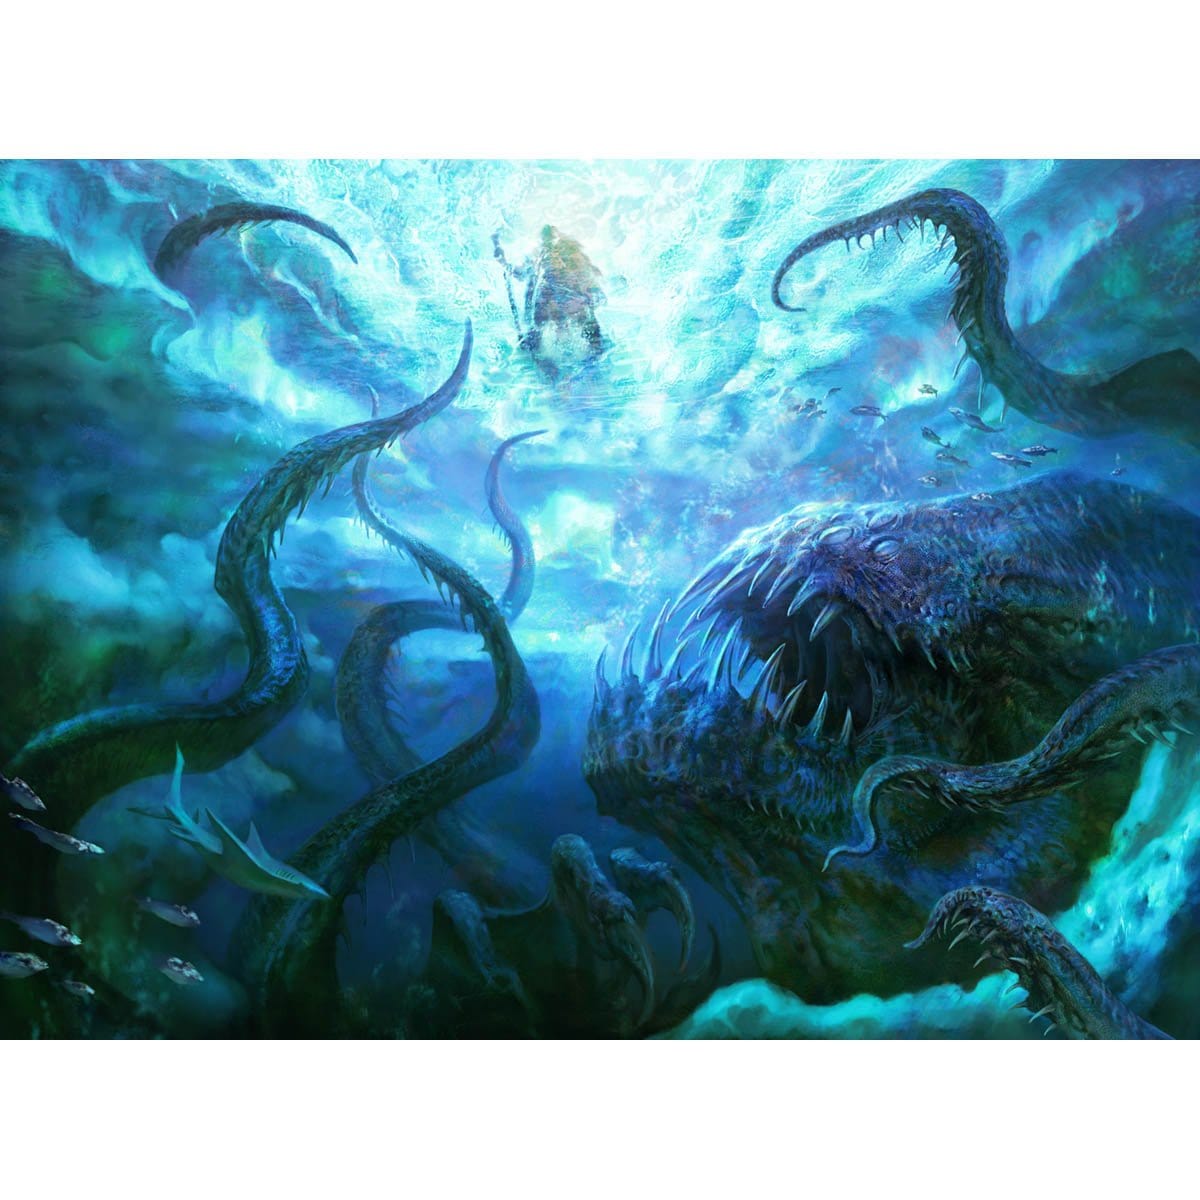 Dark Depths Print - Print - Original Magic Art - Accessories for Magic the Gathering and other card games